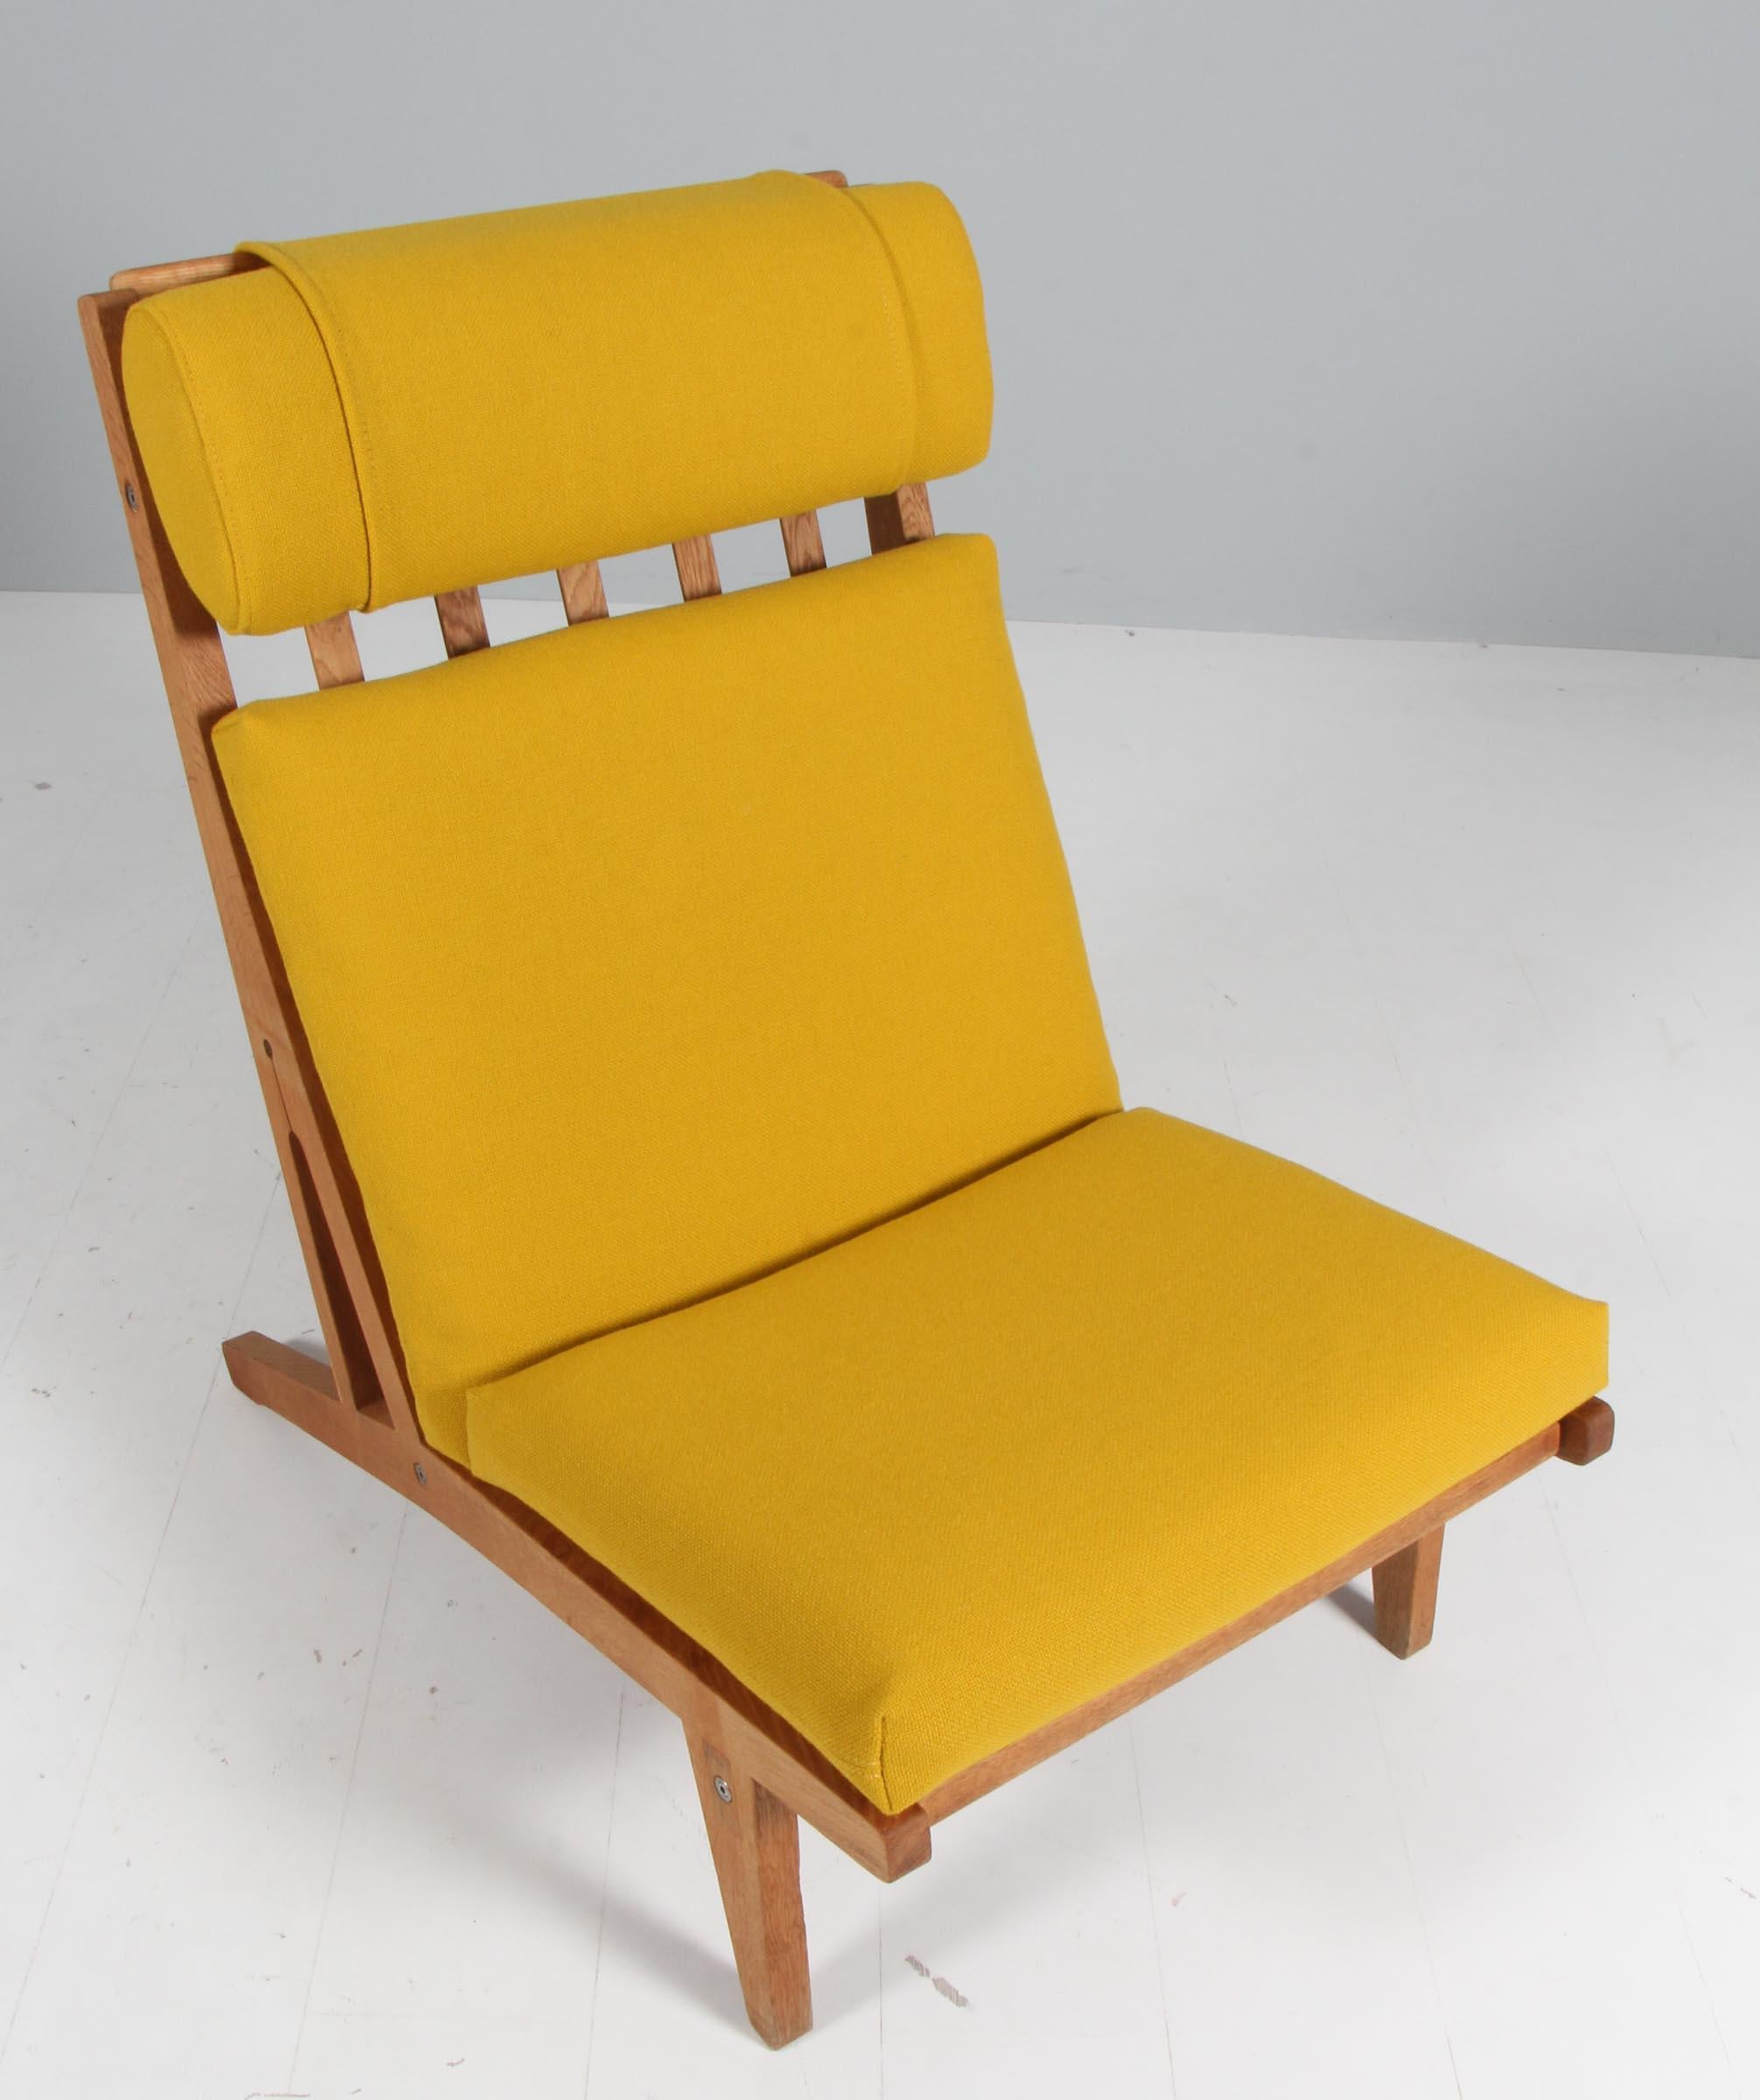 Hans J. Wegner lounge chair with loose cushions new upholstered with yellow Hallingdal wool fabric.

Frame of oak.

Model GE-375, made by GETAMA.